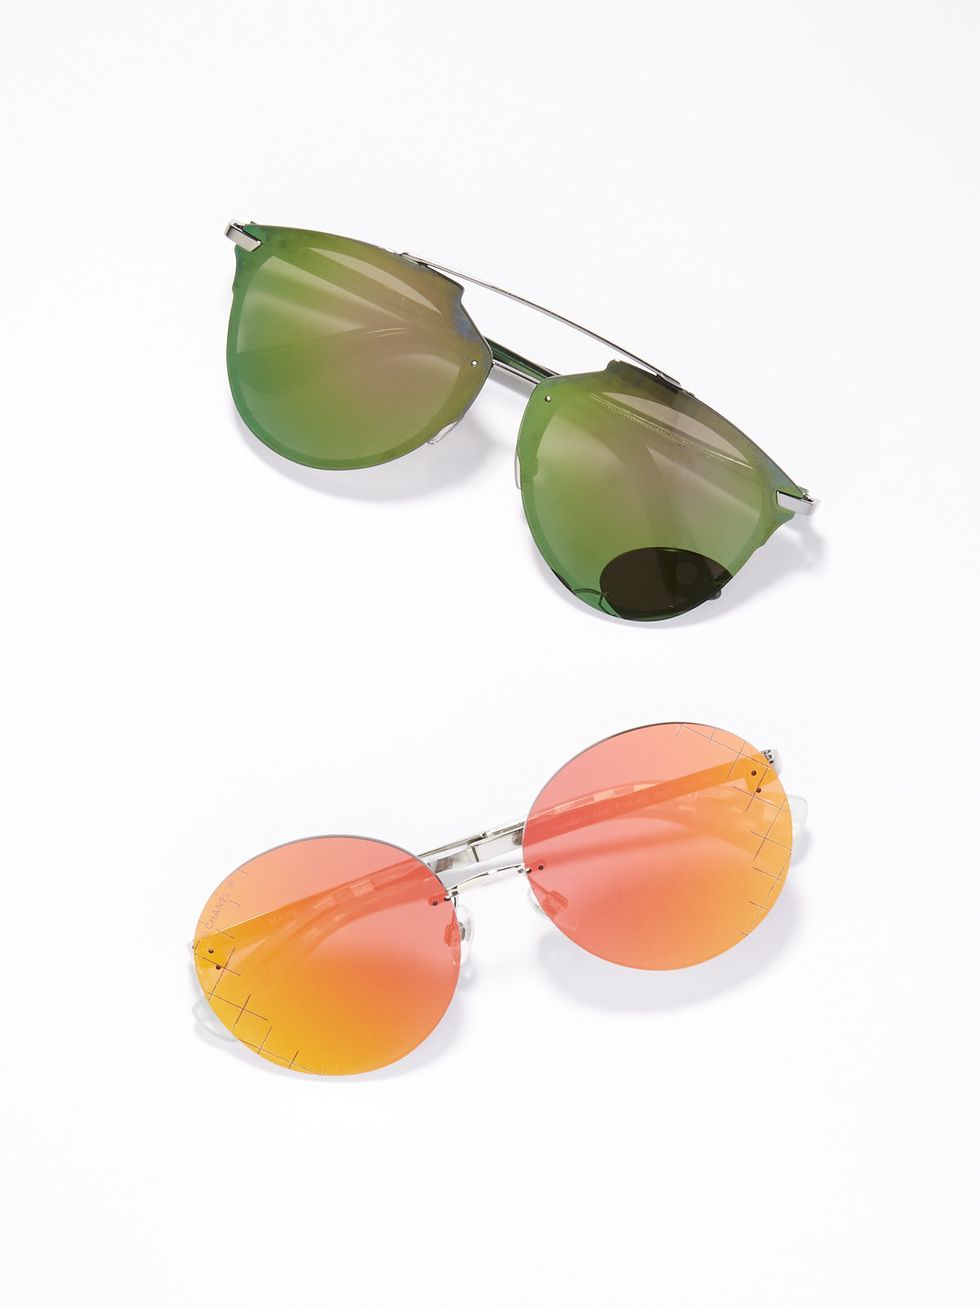 Eyewear, Vision care, Product, Glasses, Brown, Green, Yellow, Sunglasses, Glass, Photograph, 